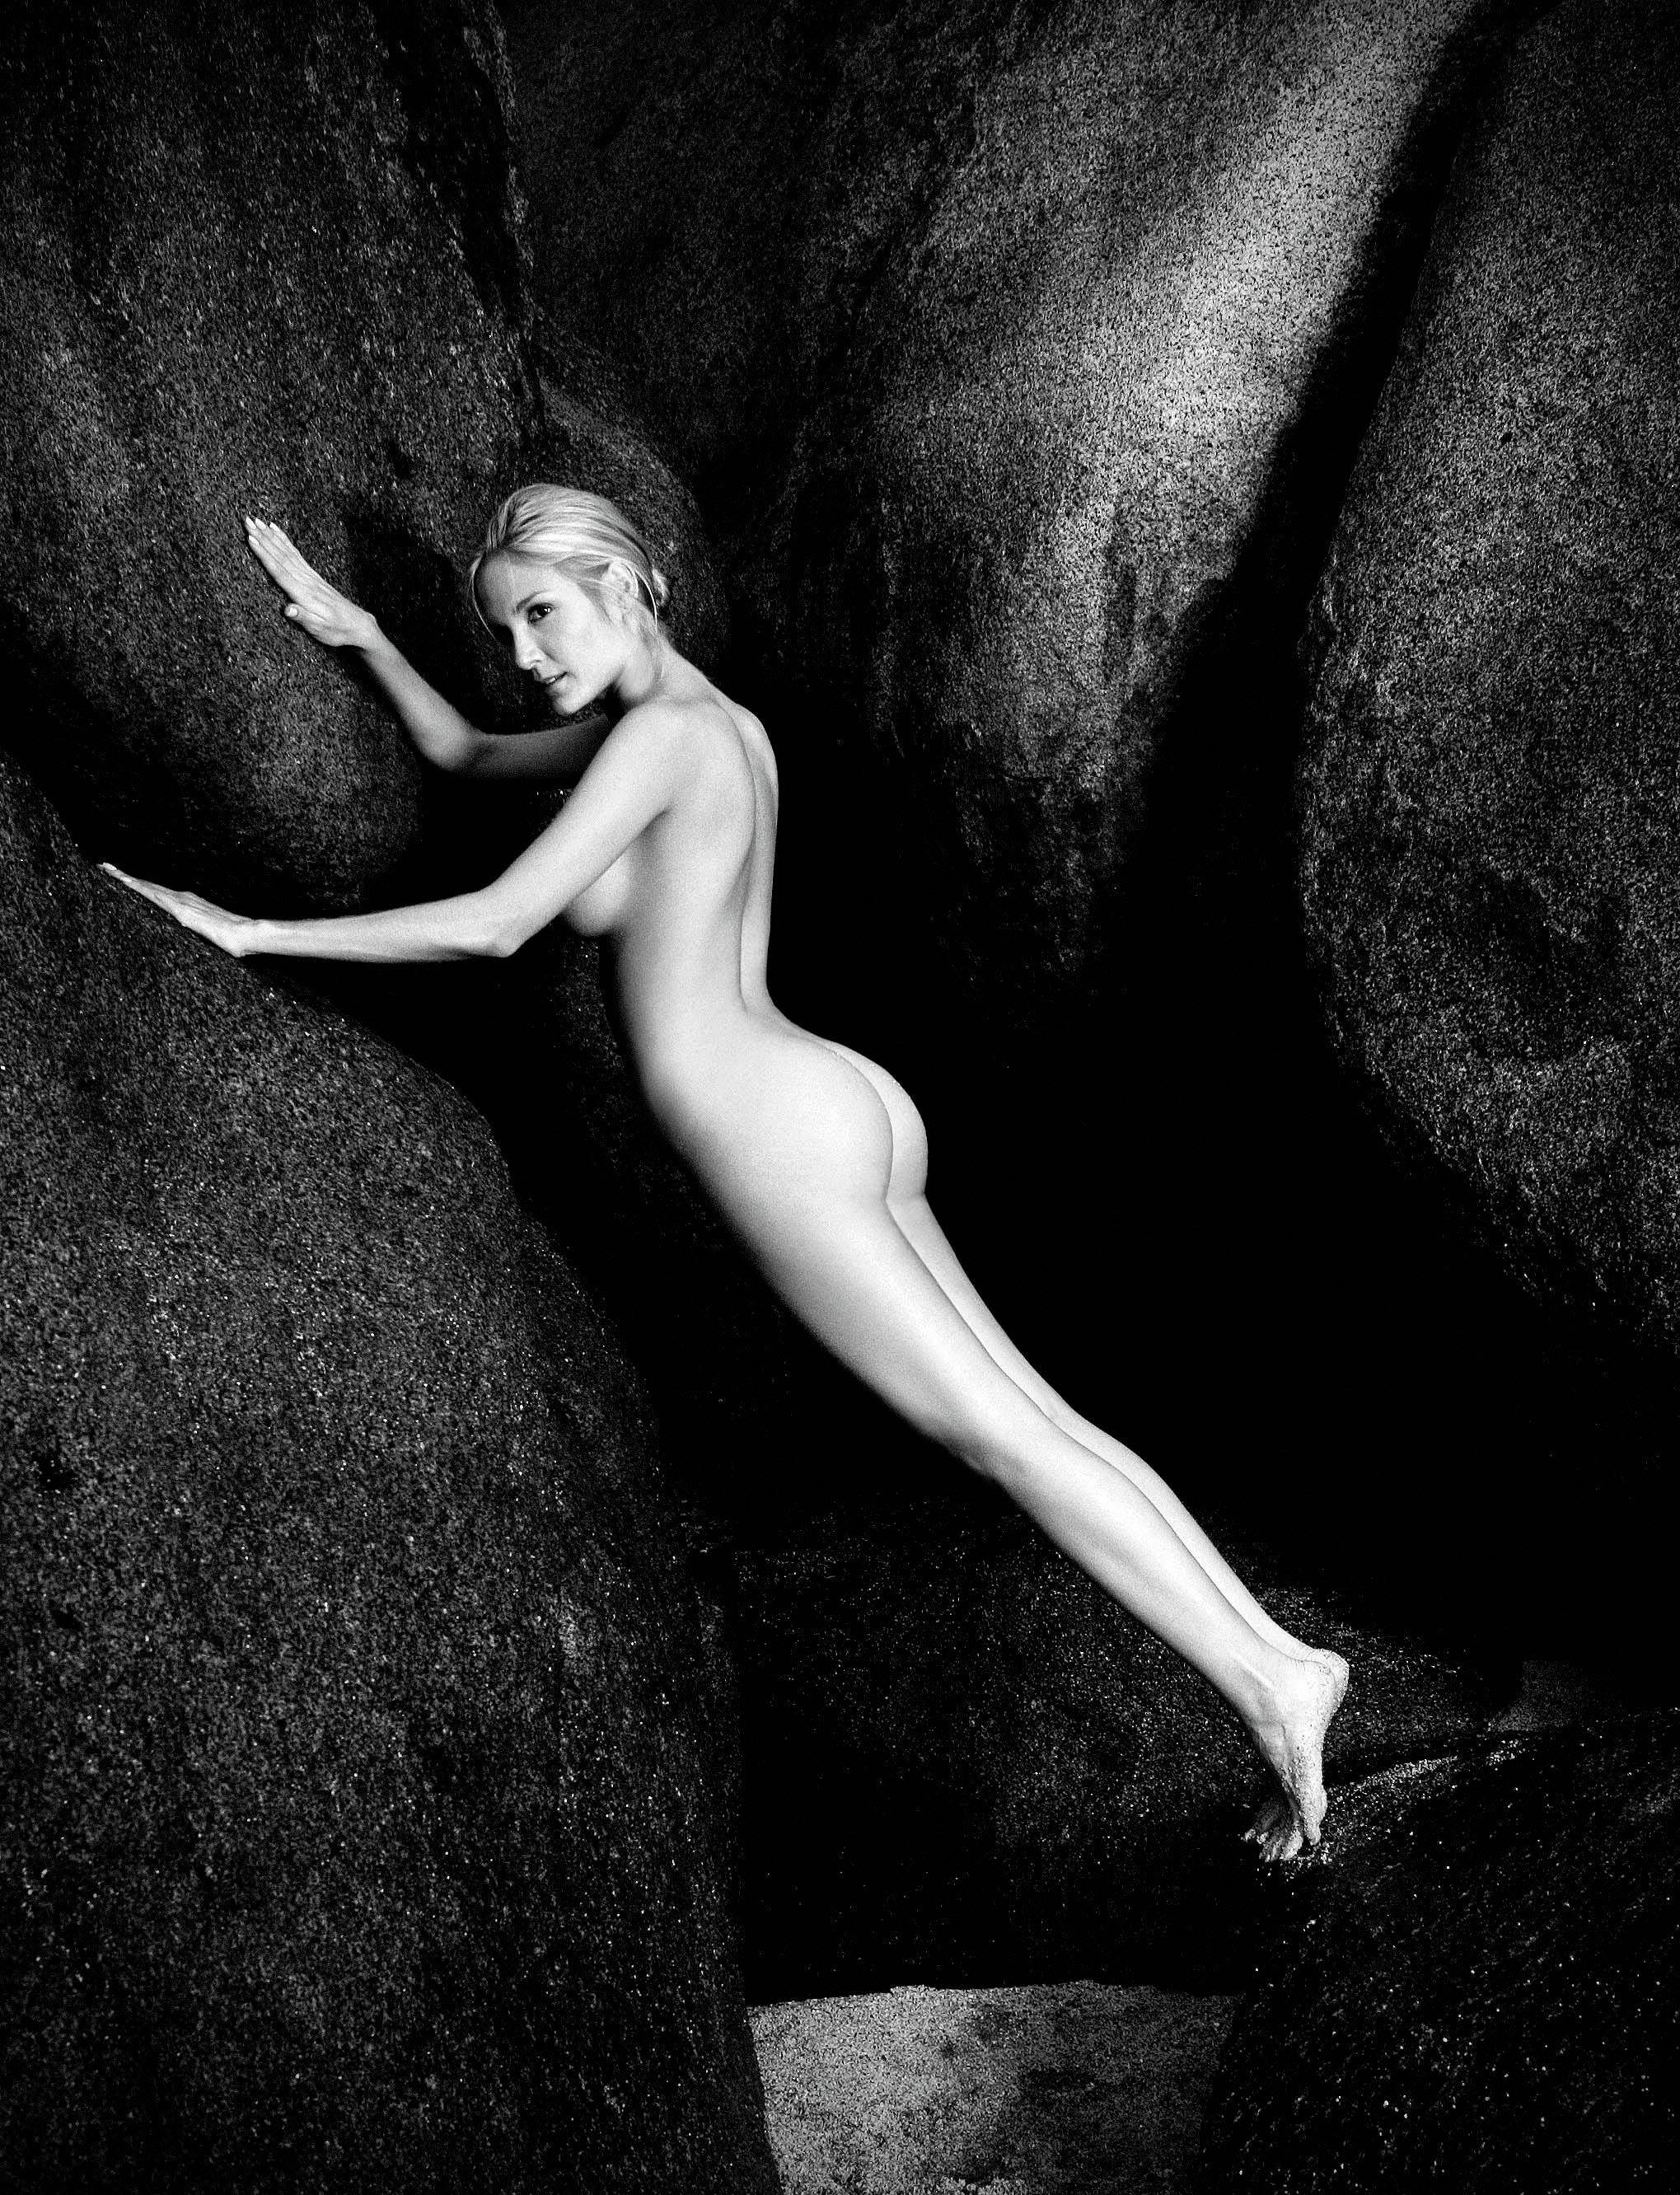 Half Angels Half Demons #17, Nude in a landscape. Black and white photograph